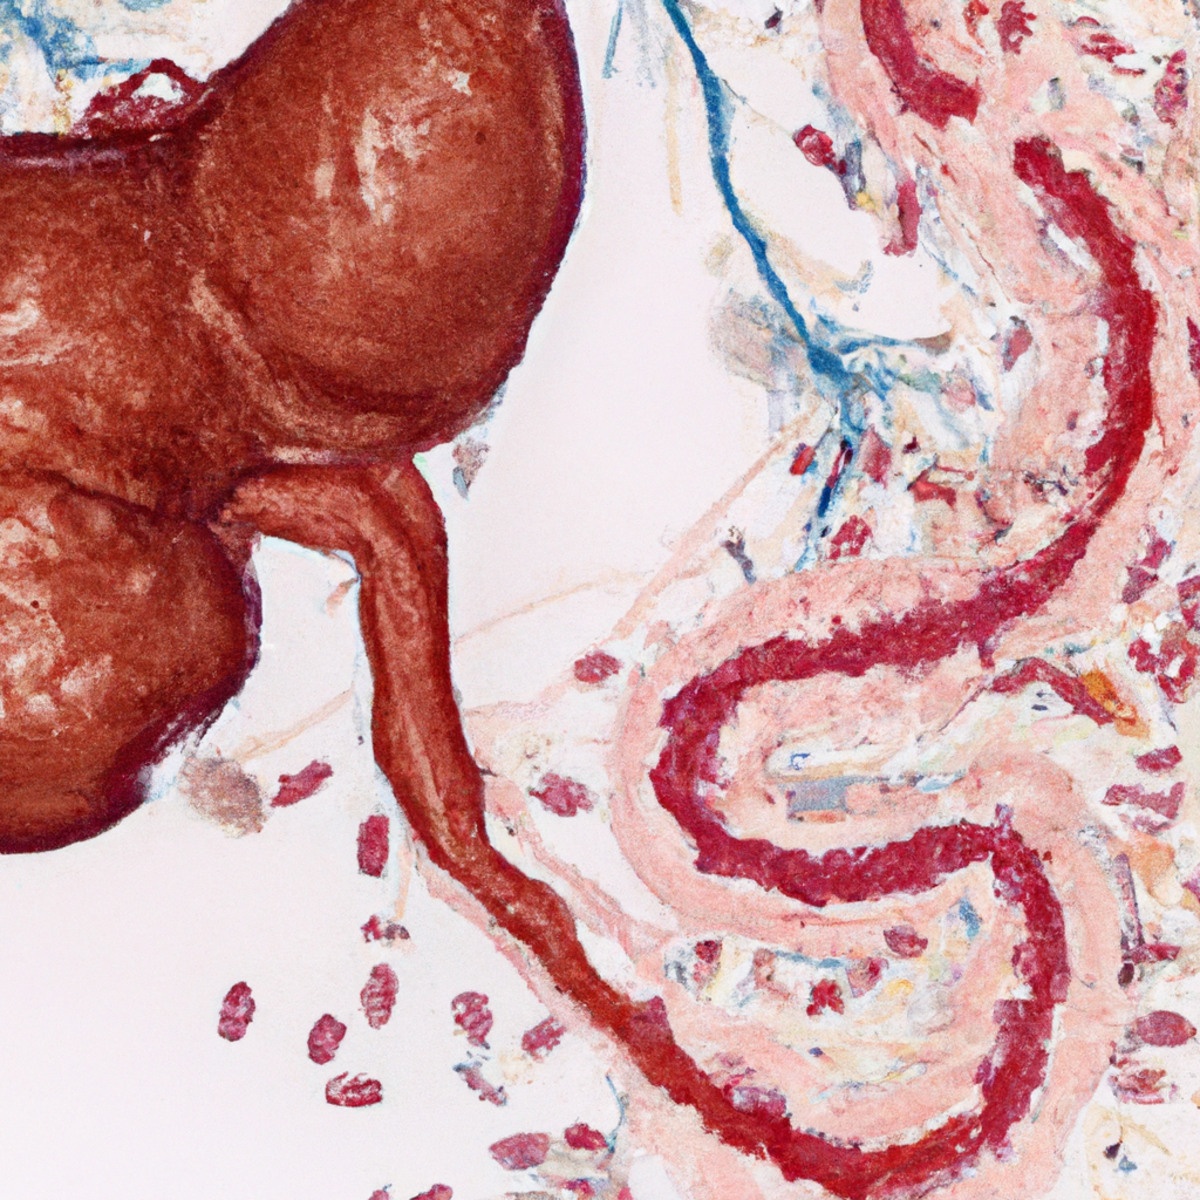 Close-up photo of annular pancreas specimen, revealing intricate ducts, blood vessels, and abnormalities.